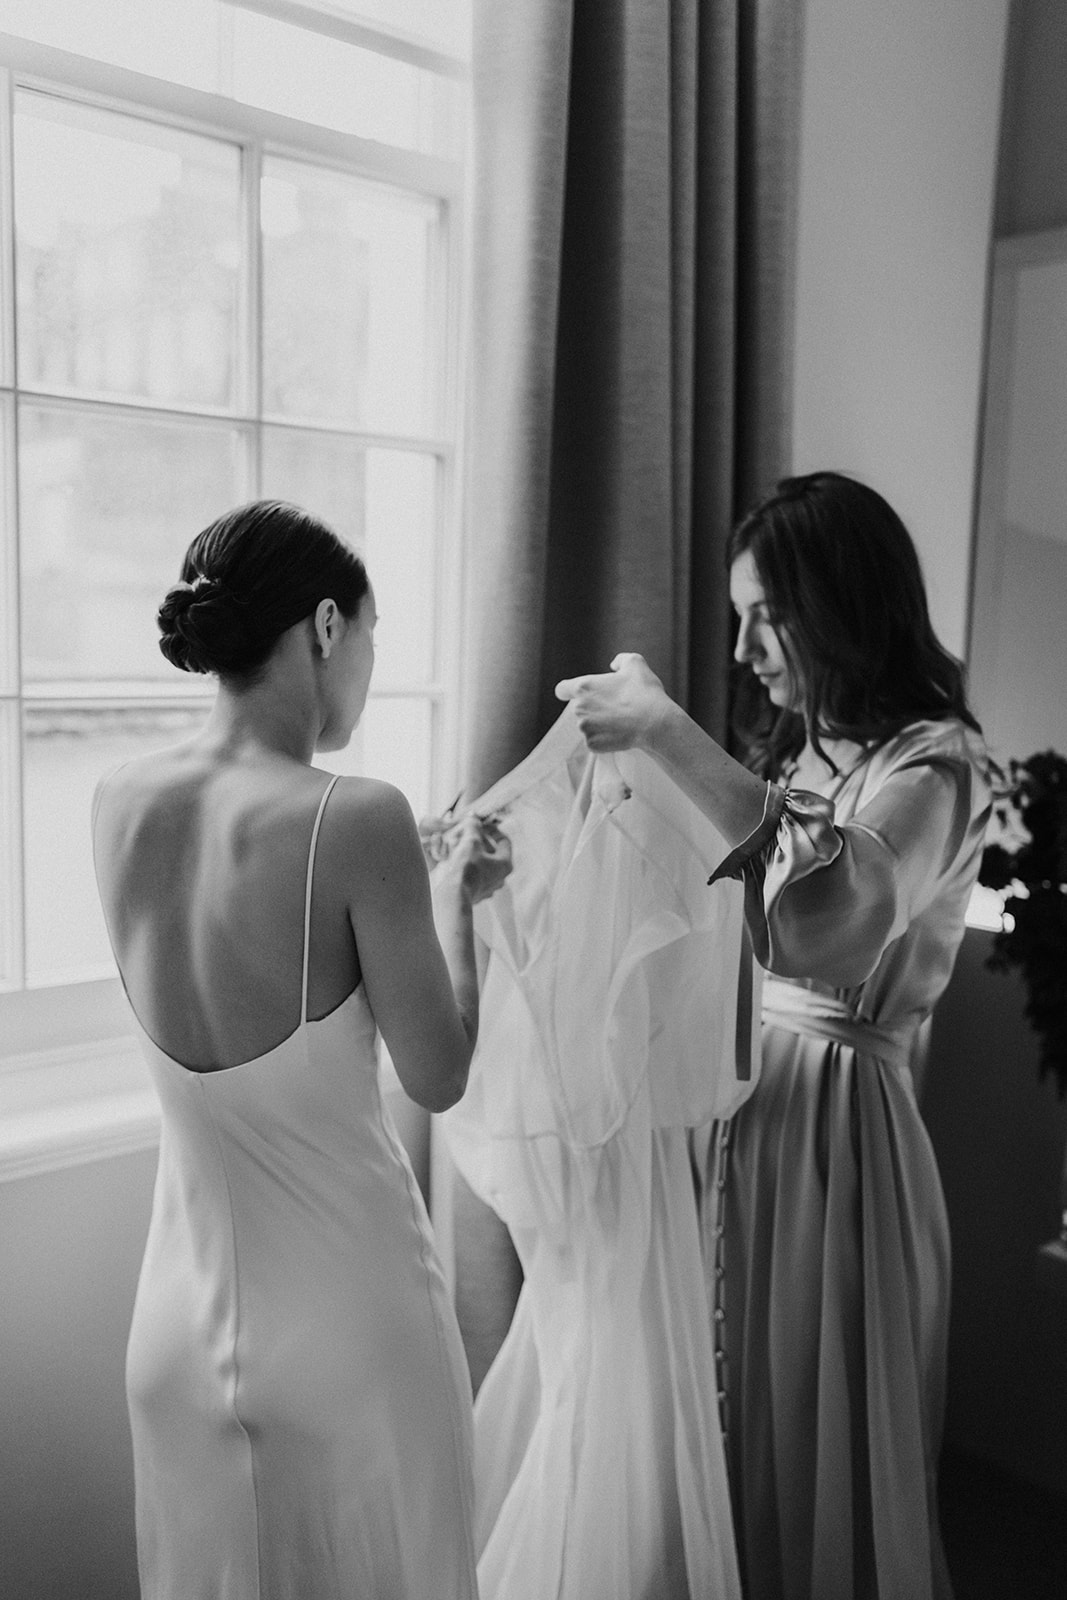 Sarah & Brendon Wedding: Intimate Ceremony at the Old Marylebone Town Hal